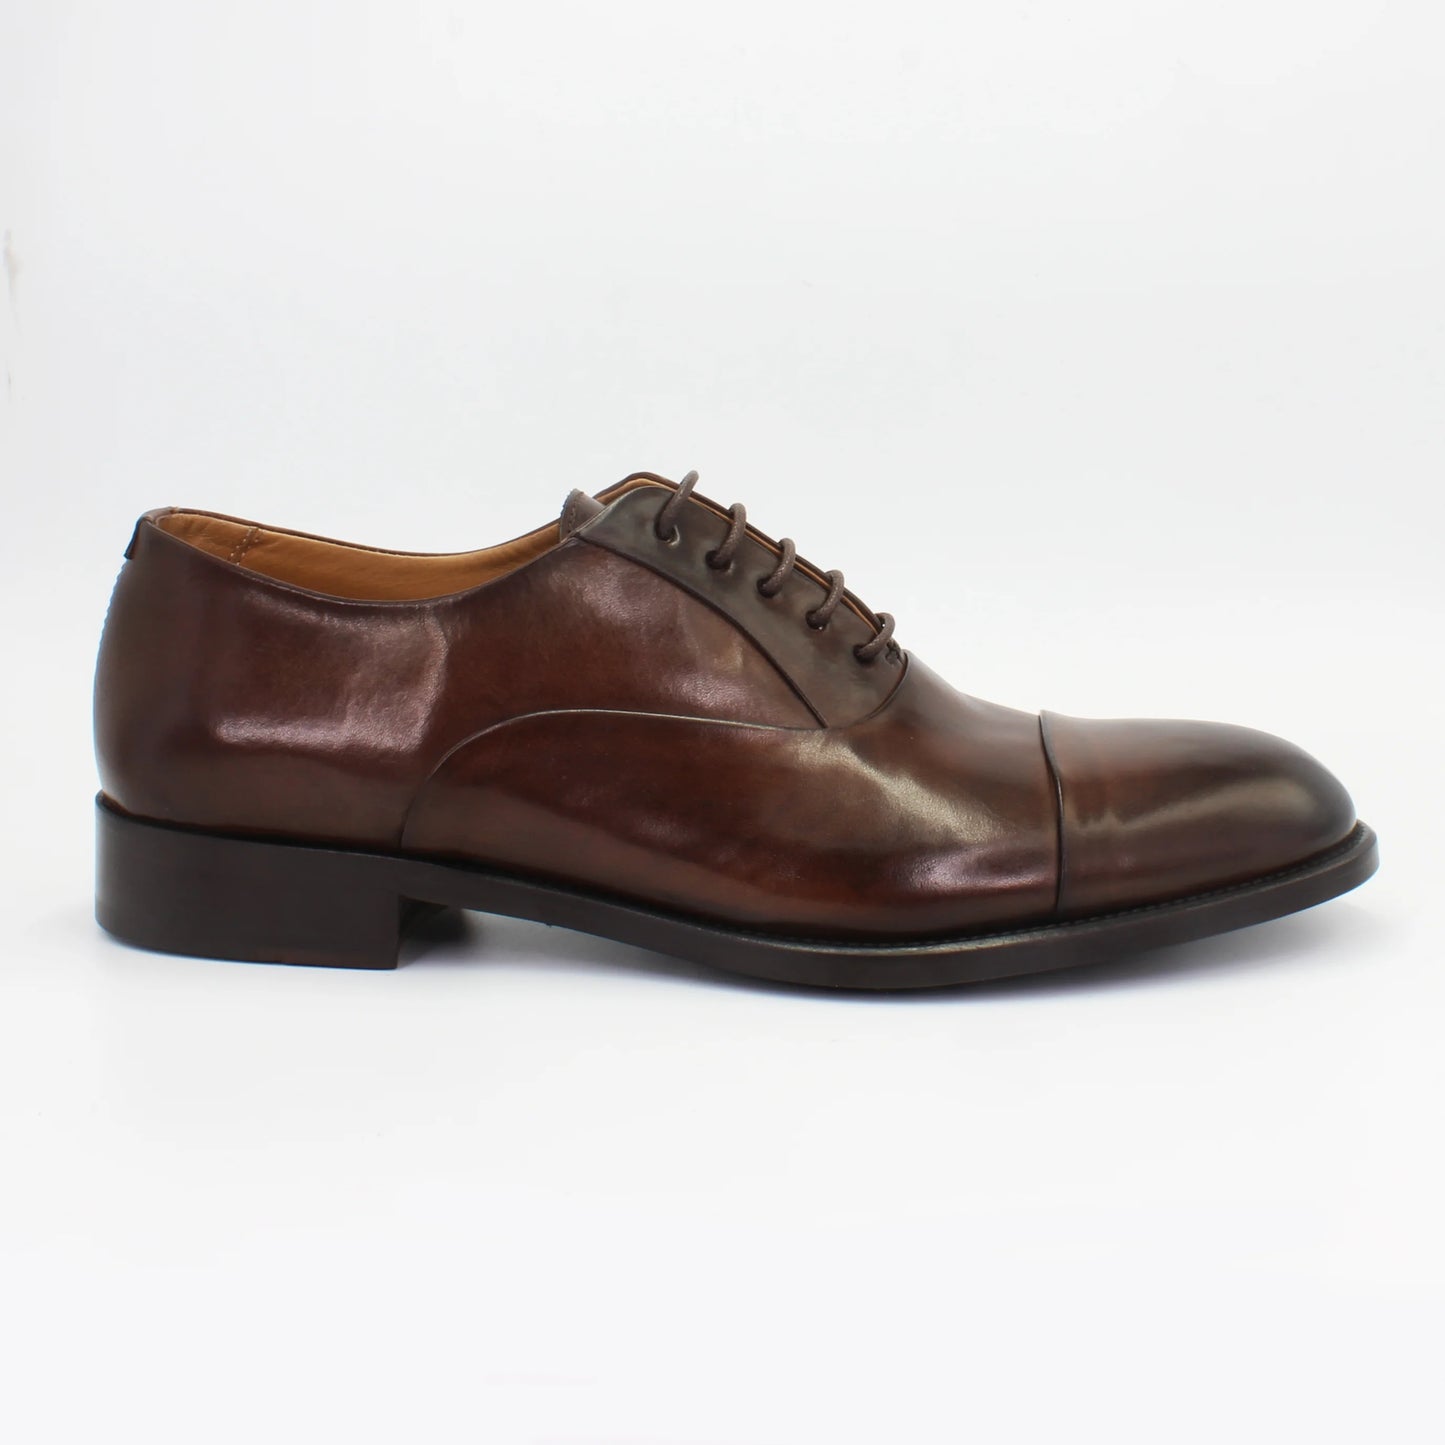 Shop Handmade Italian Leather Oxford in T.Moro (BRU11278)  or browse our range of hand-made Italian Shoes for men in leather or suede in-store at Aliverti Cape Town, or shop online. We deliver in South Africa & offer multiple payment plans as well as accept multiple safe & secure payment methods.